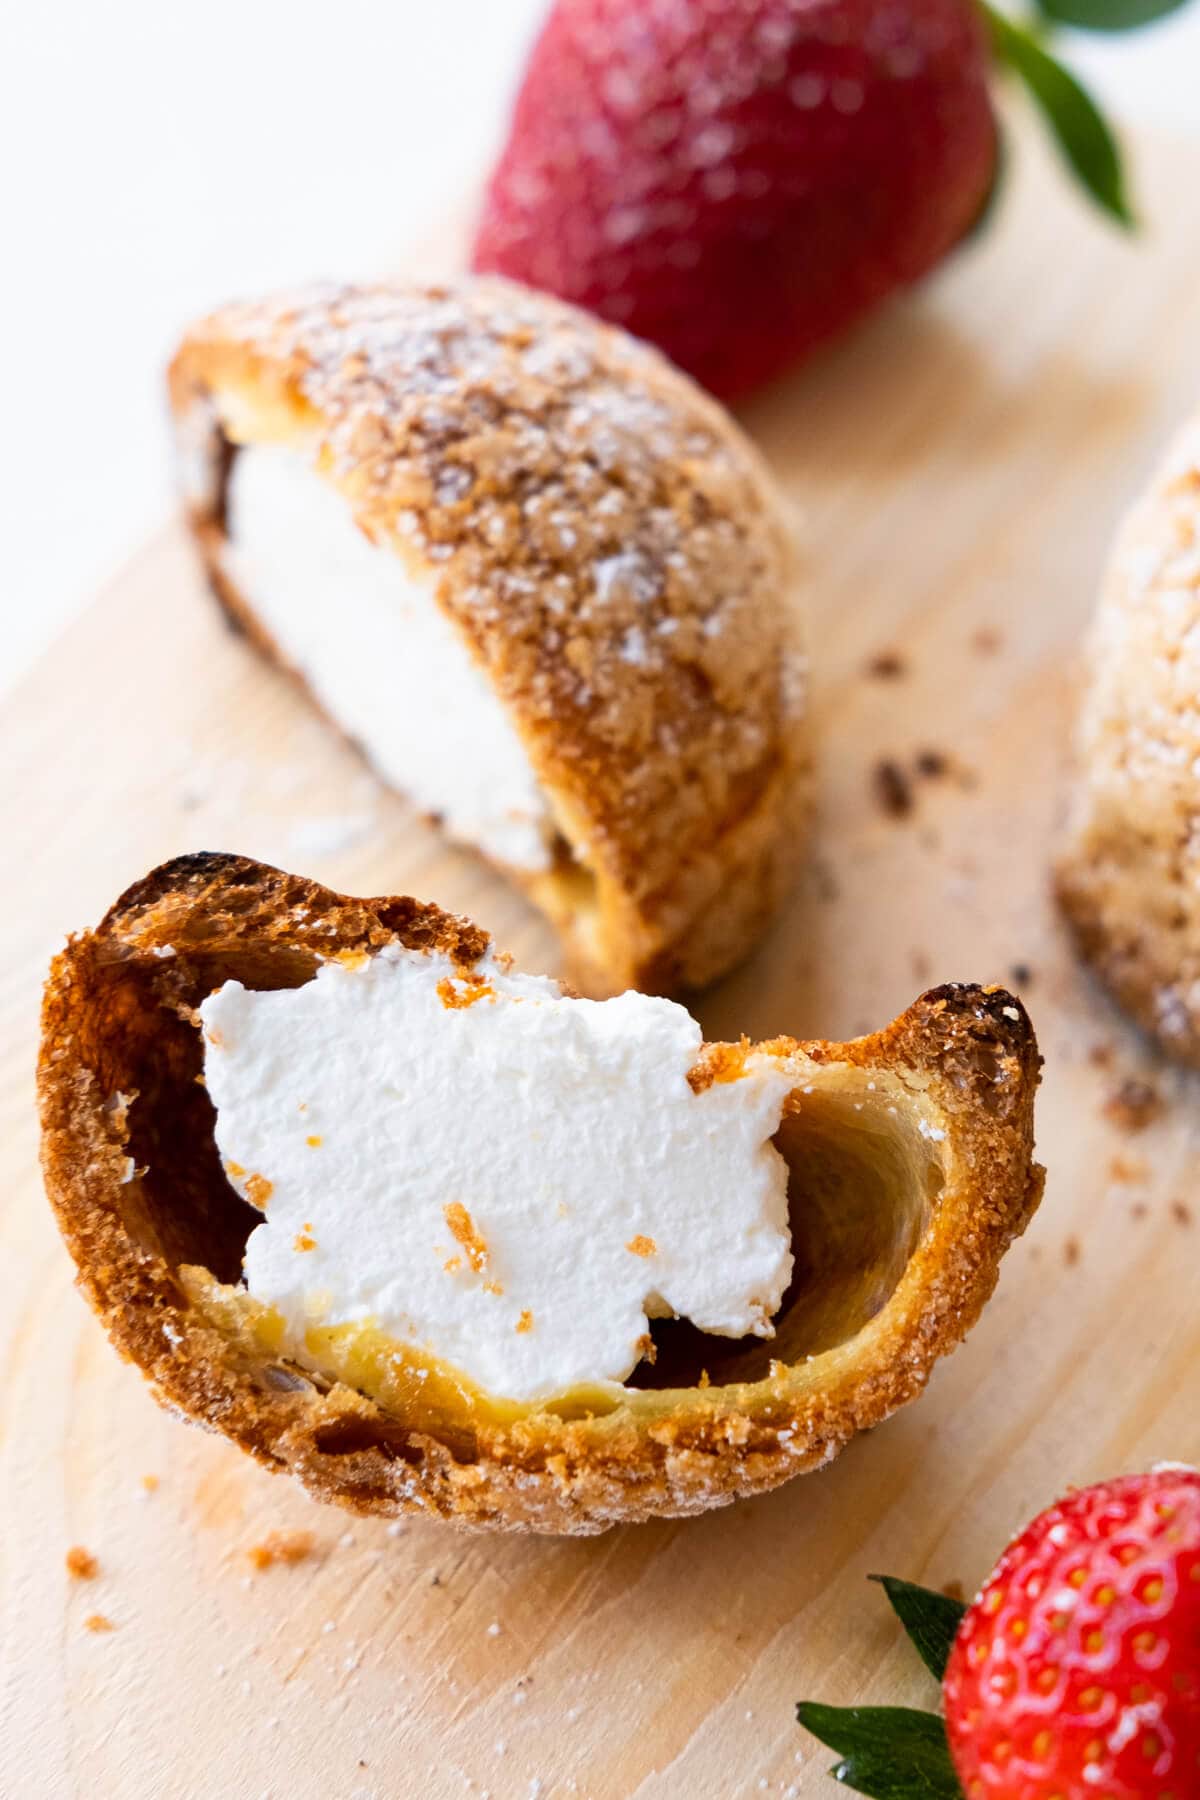 Cream filled choux pastry with sweet cream filled in the center. 